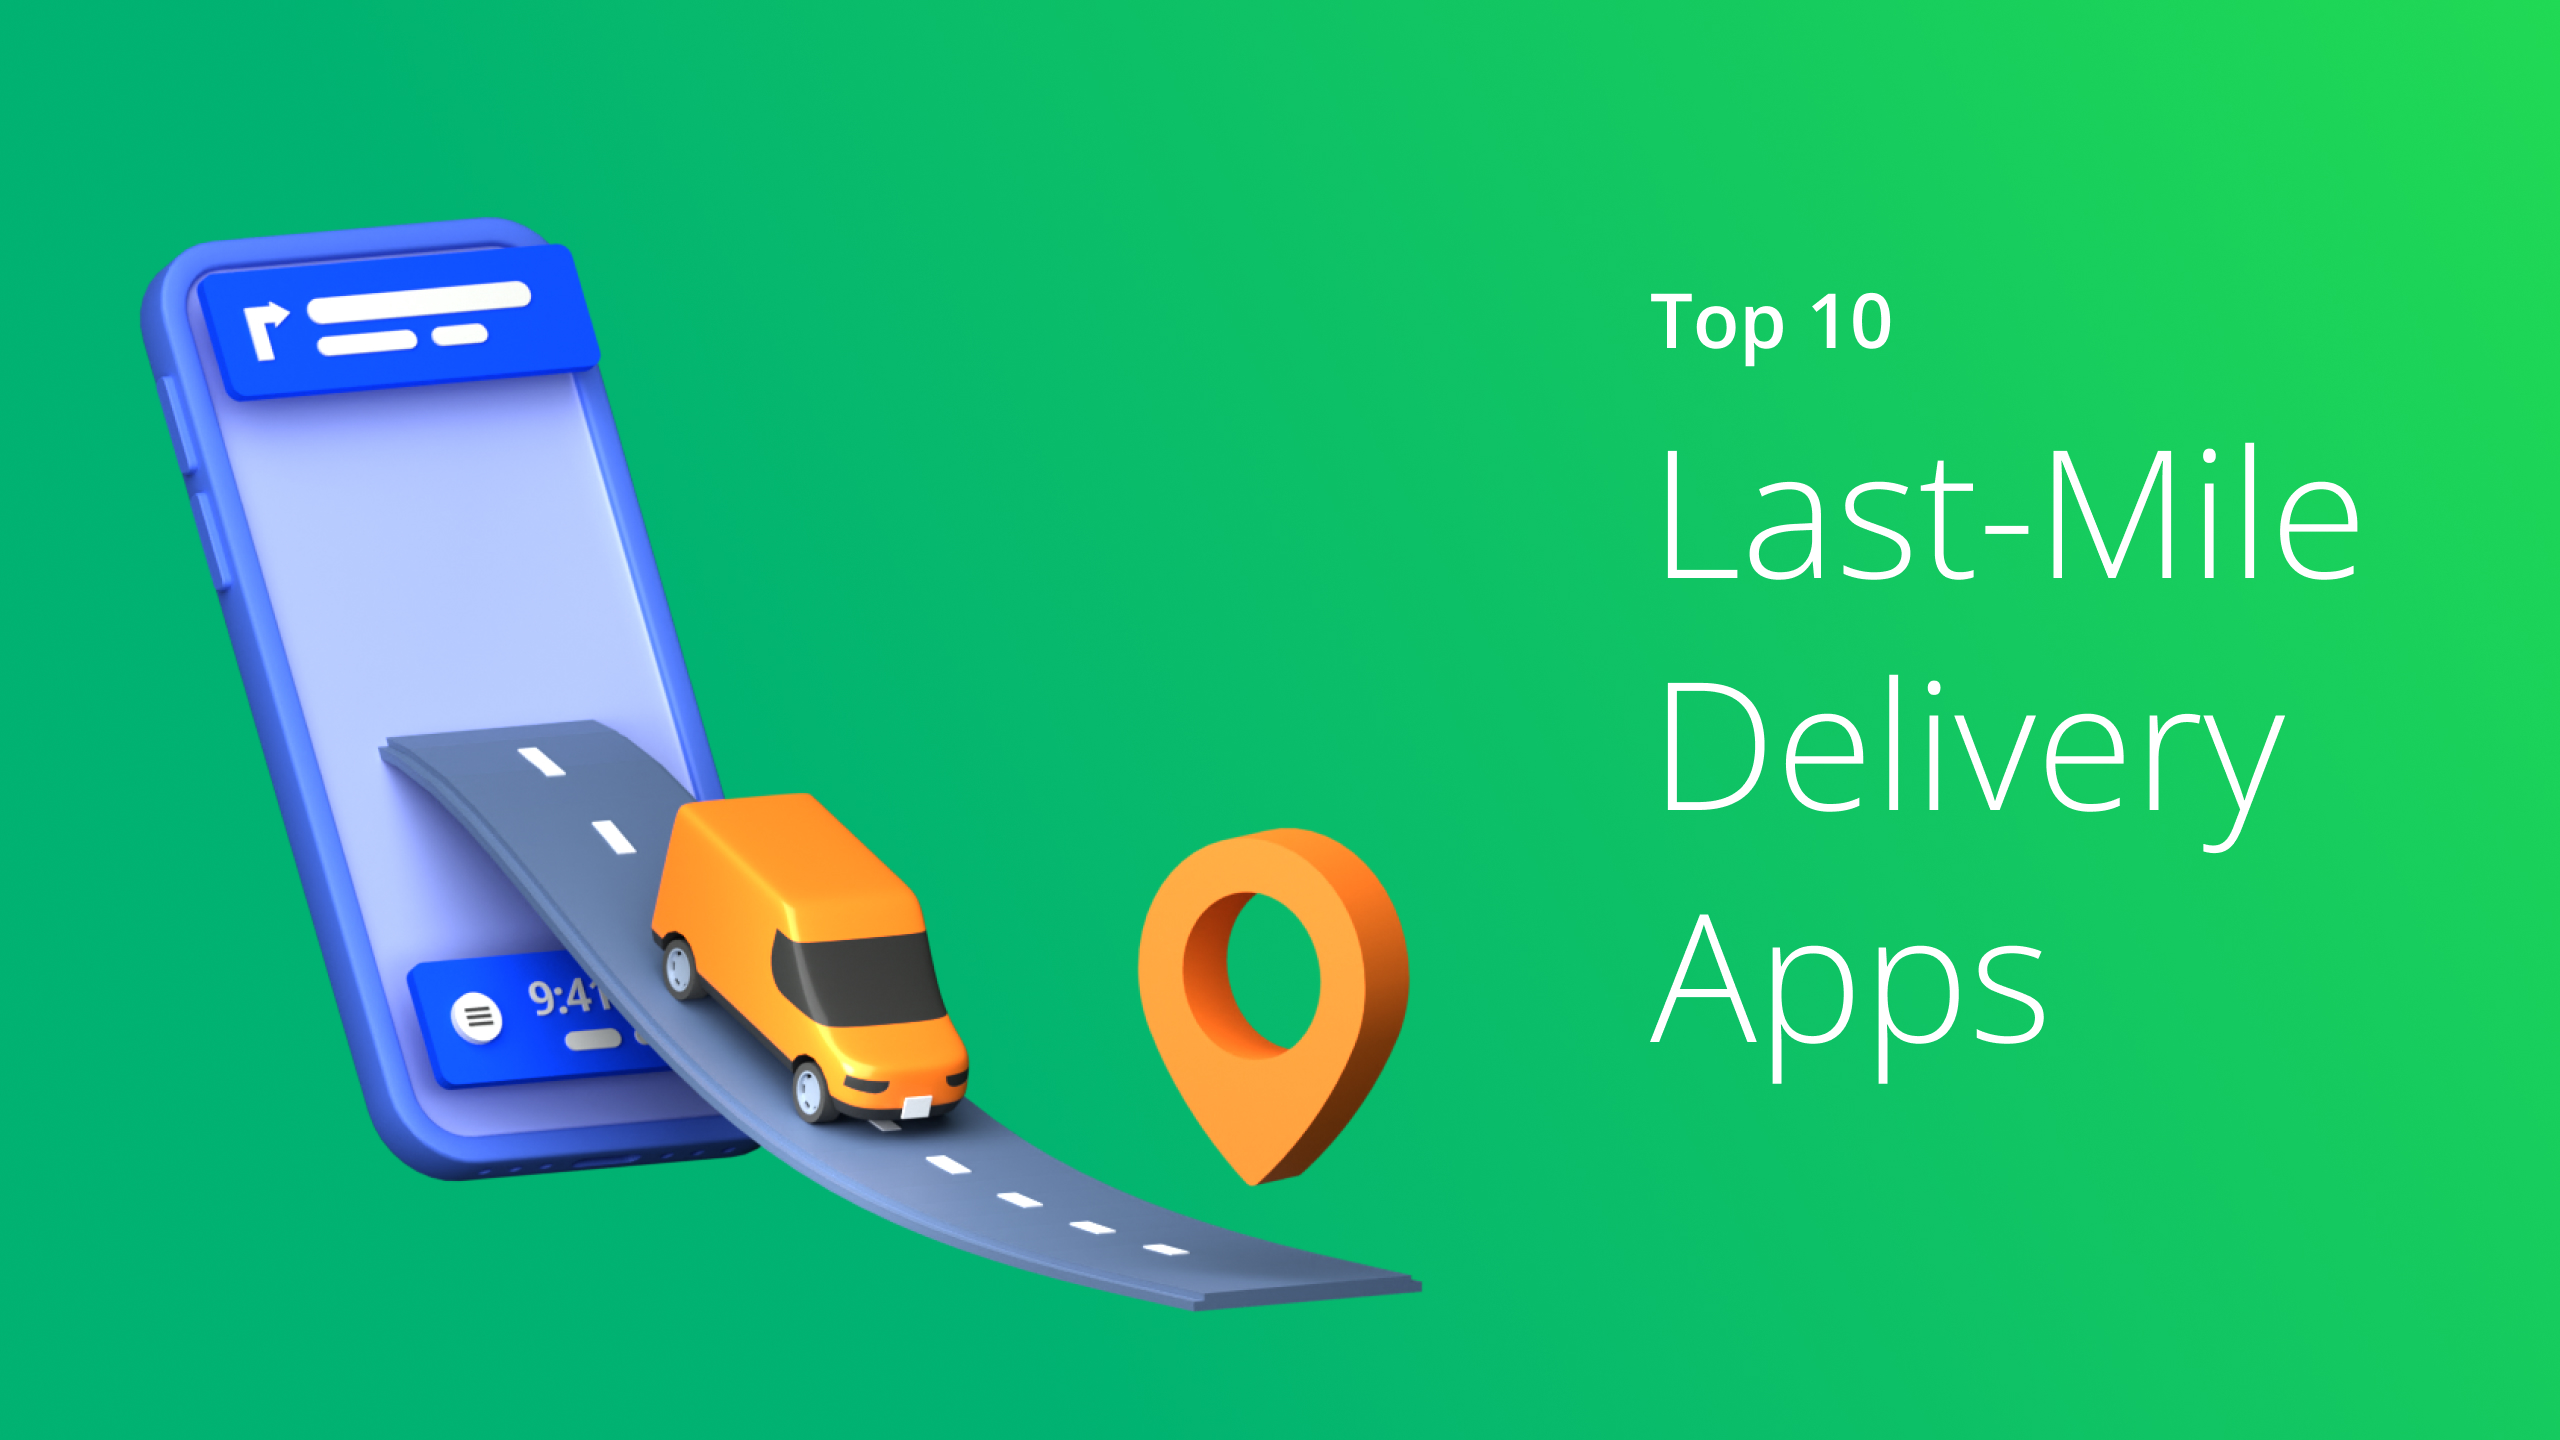 Custom Image - Top 10 Last Mile Delivery Apps